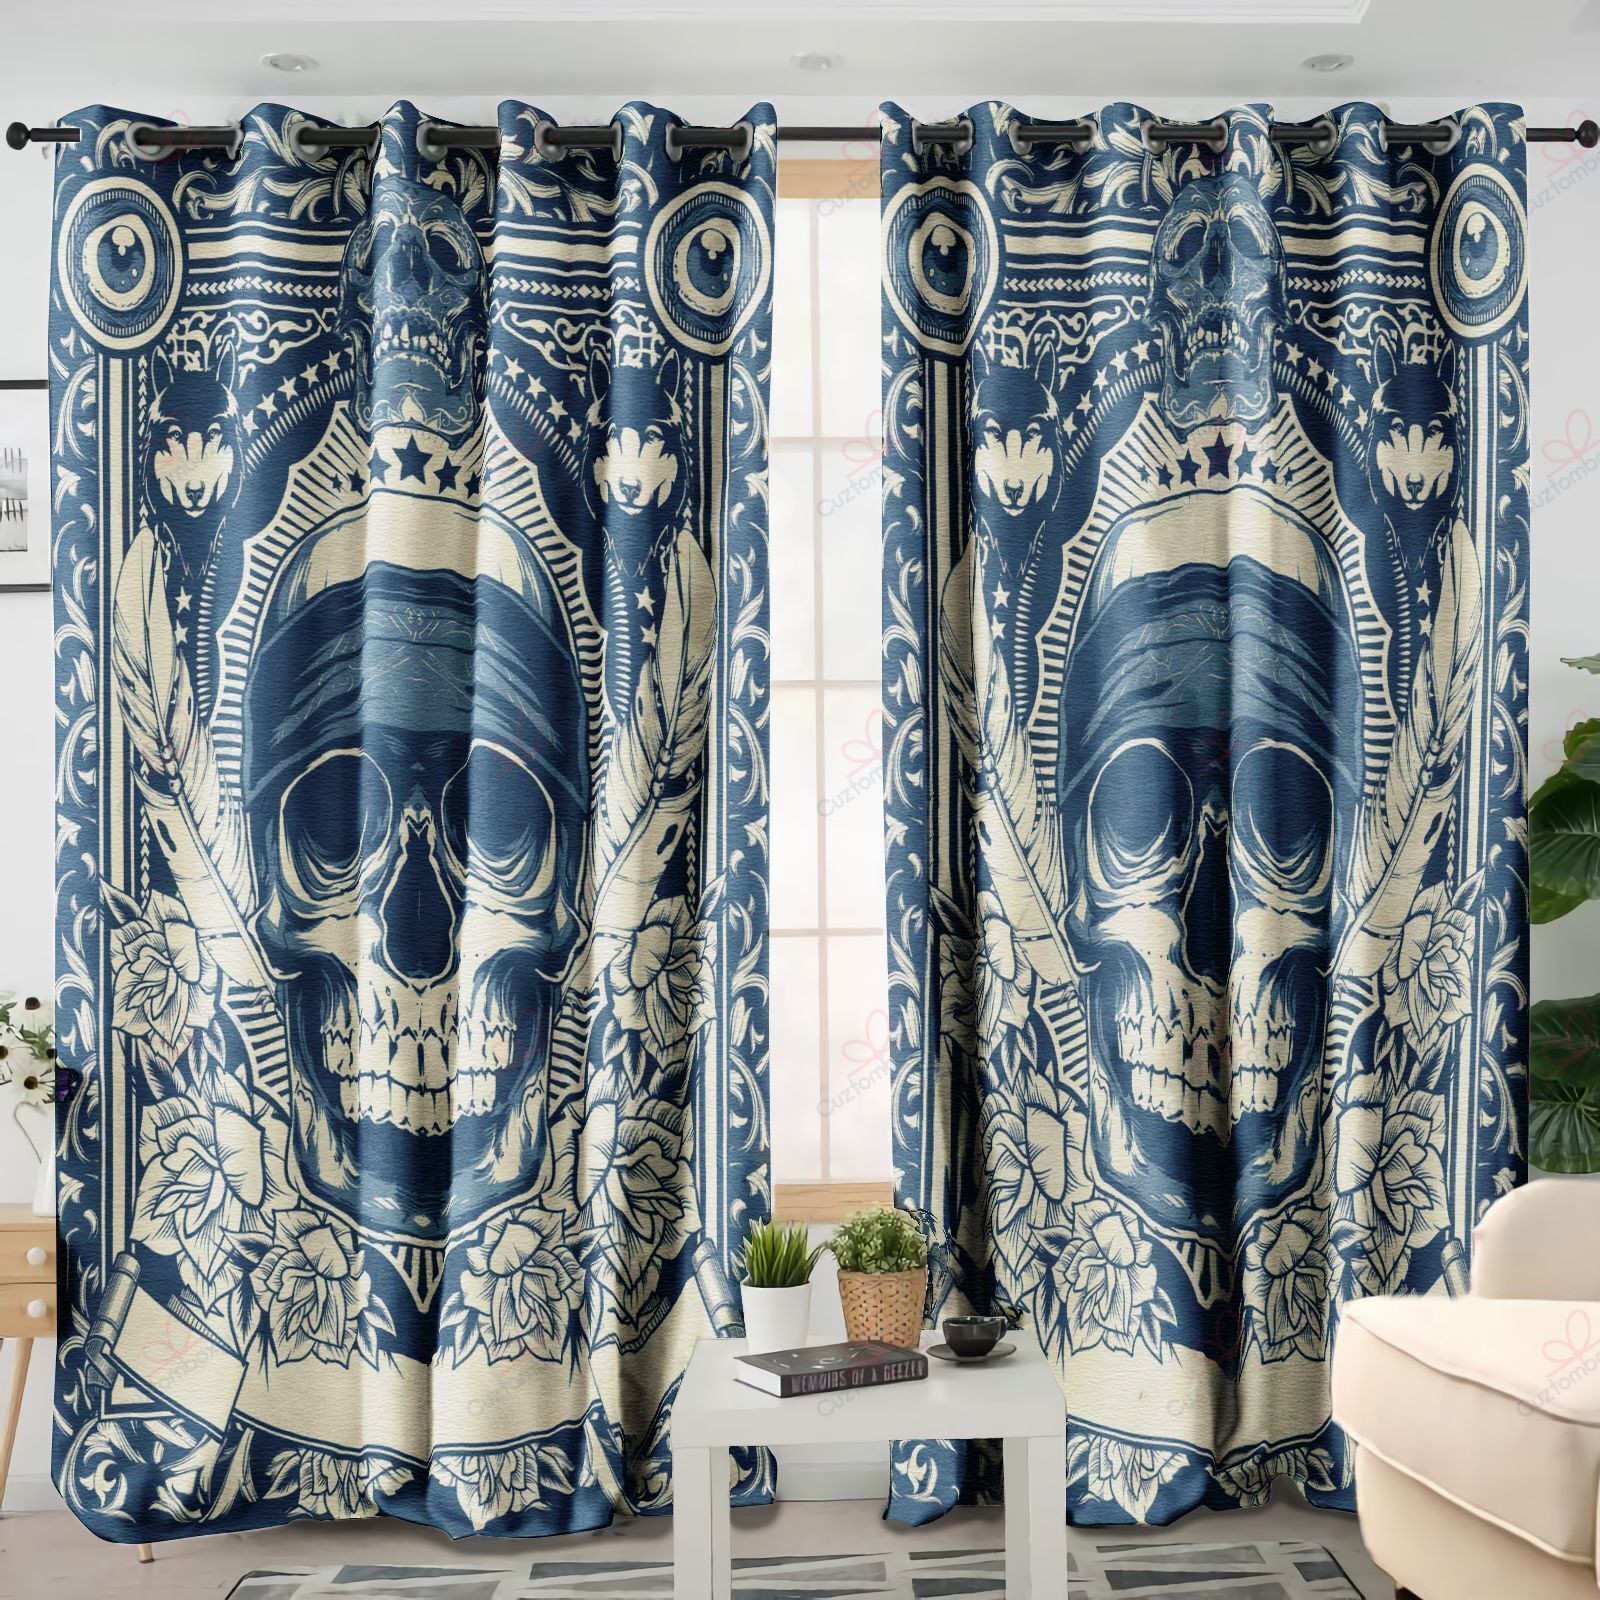 Vintage Skull And Flower Printed Window Curtain Home Decor